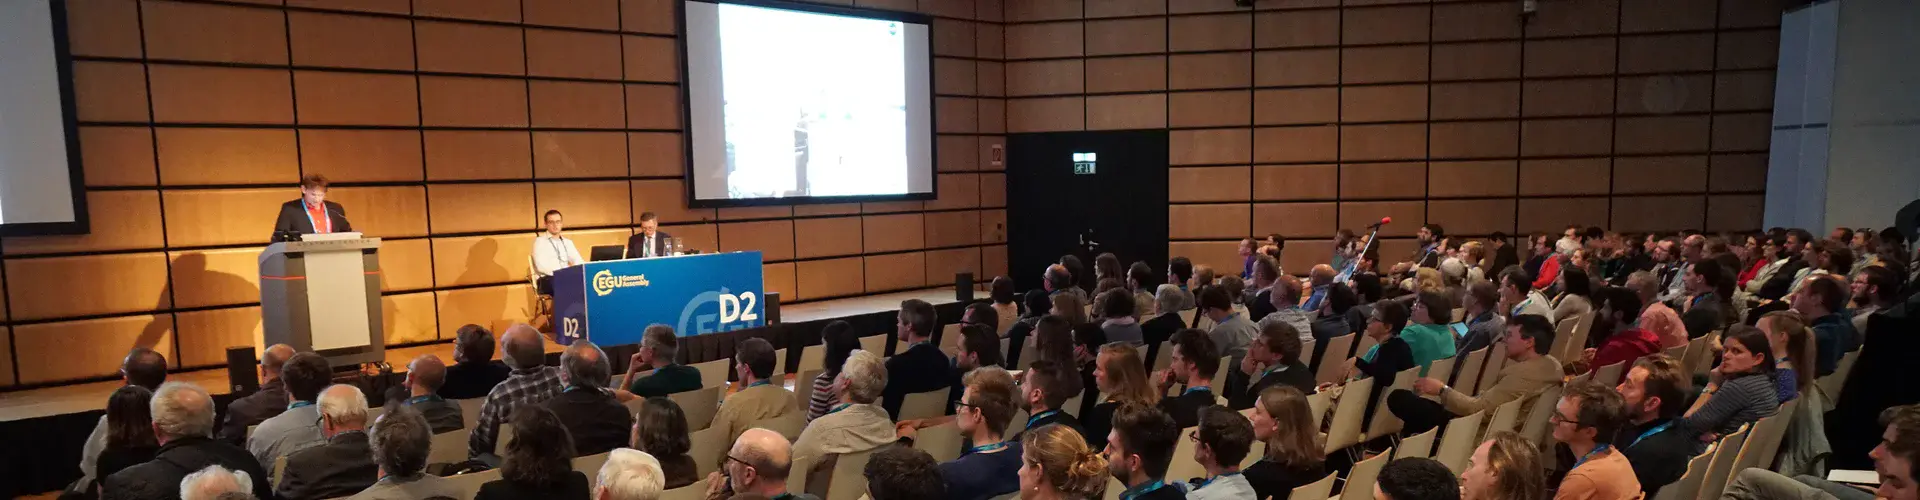 One of thousands of scientific presentations at the EGU General Assembly 2017 (Credit: Kai Boggild)